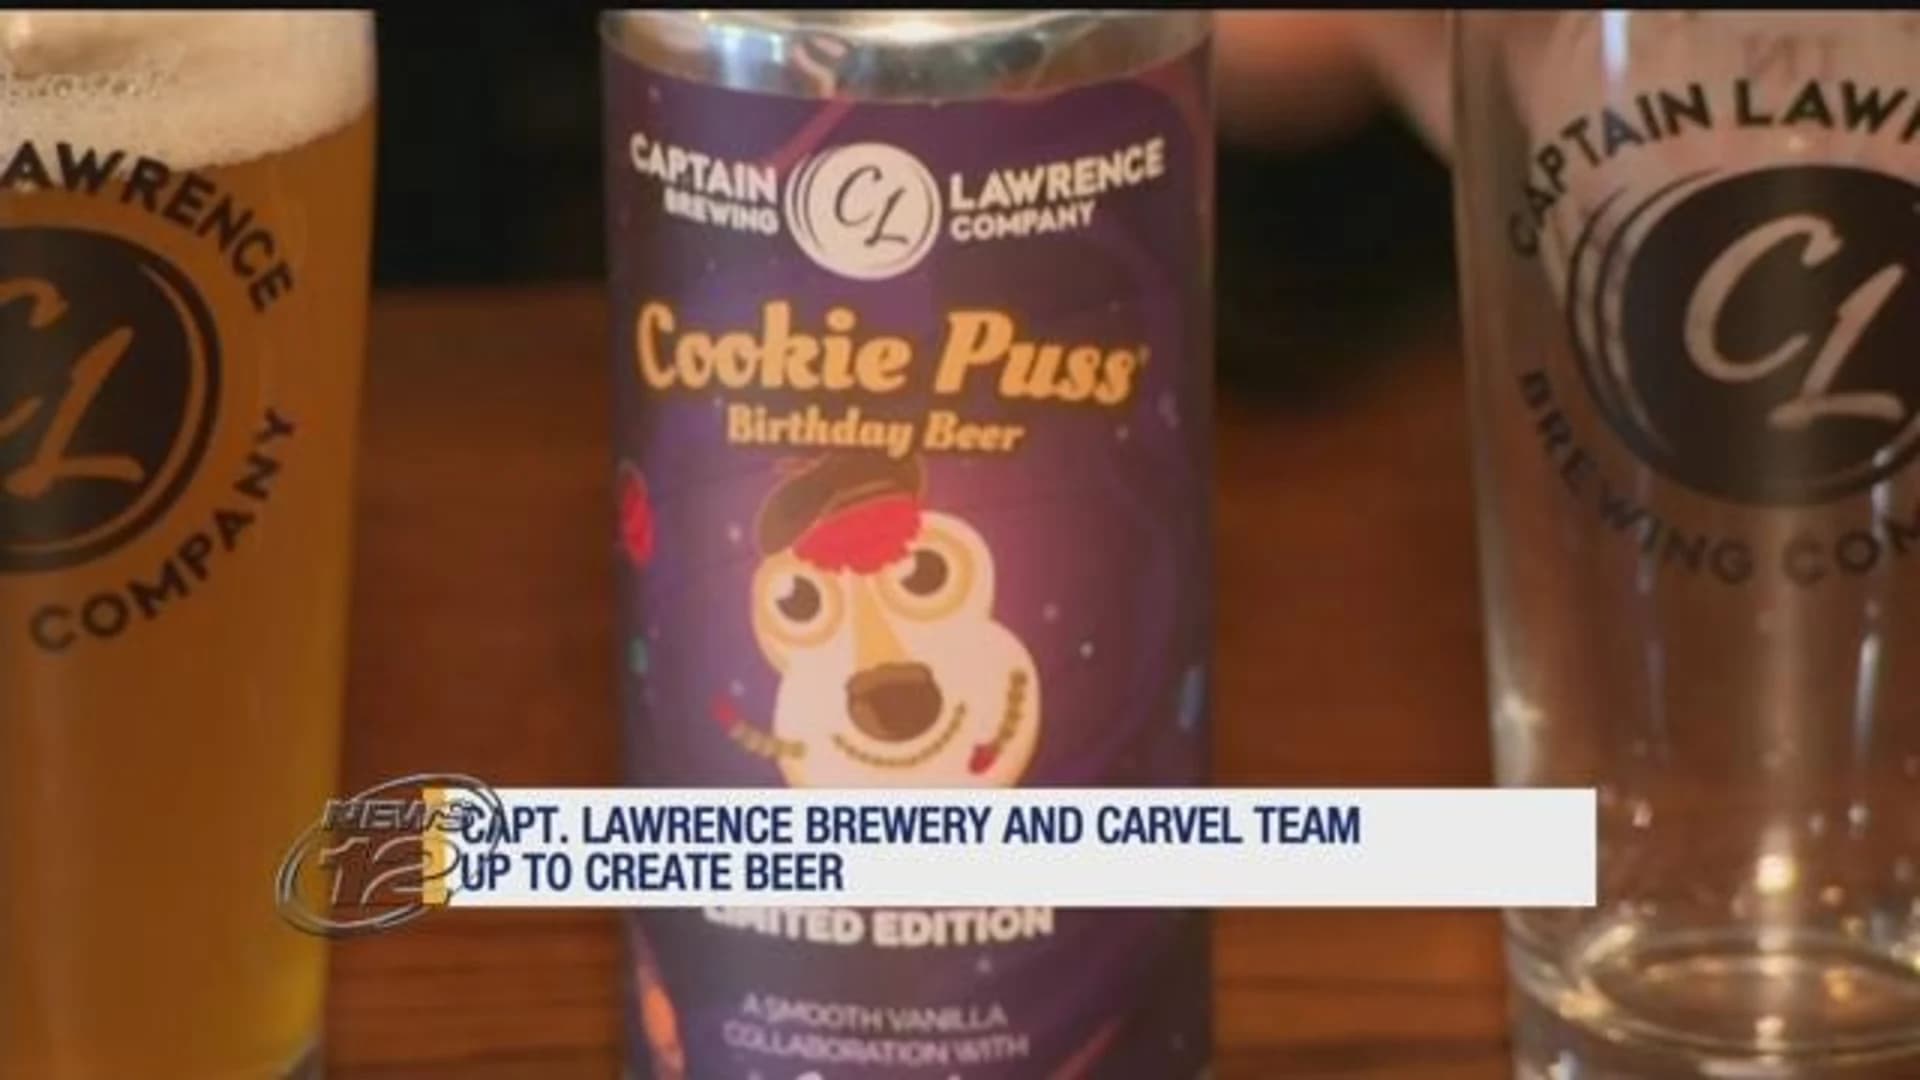 Brewery teams up with Carvel to combine beer and ice cream